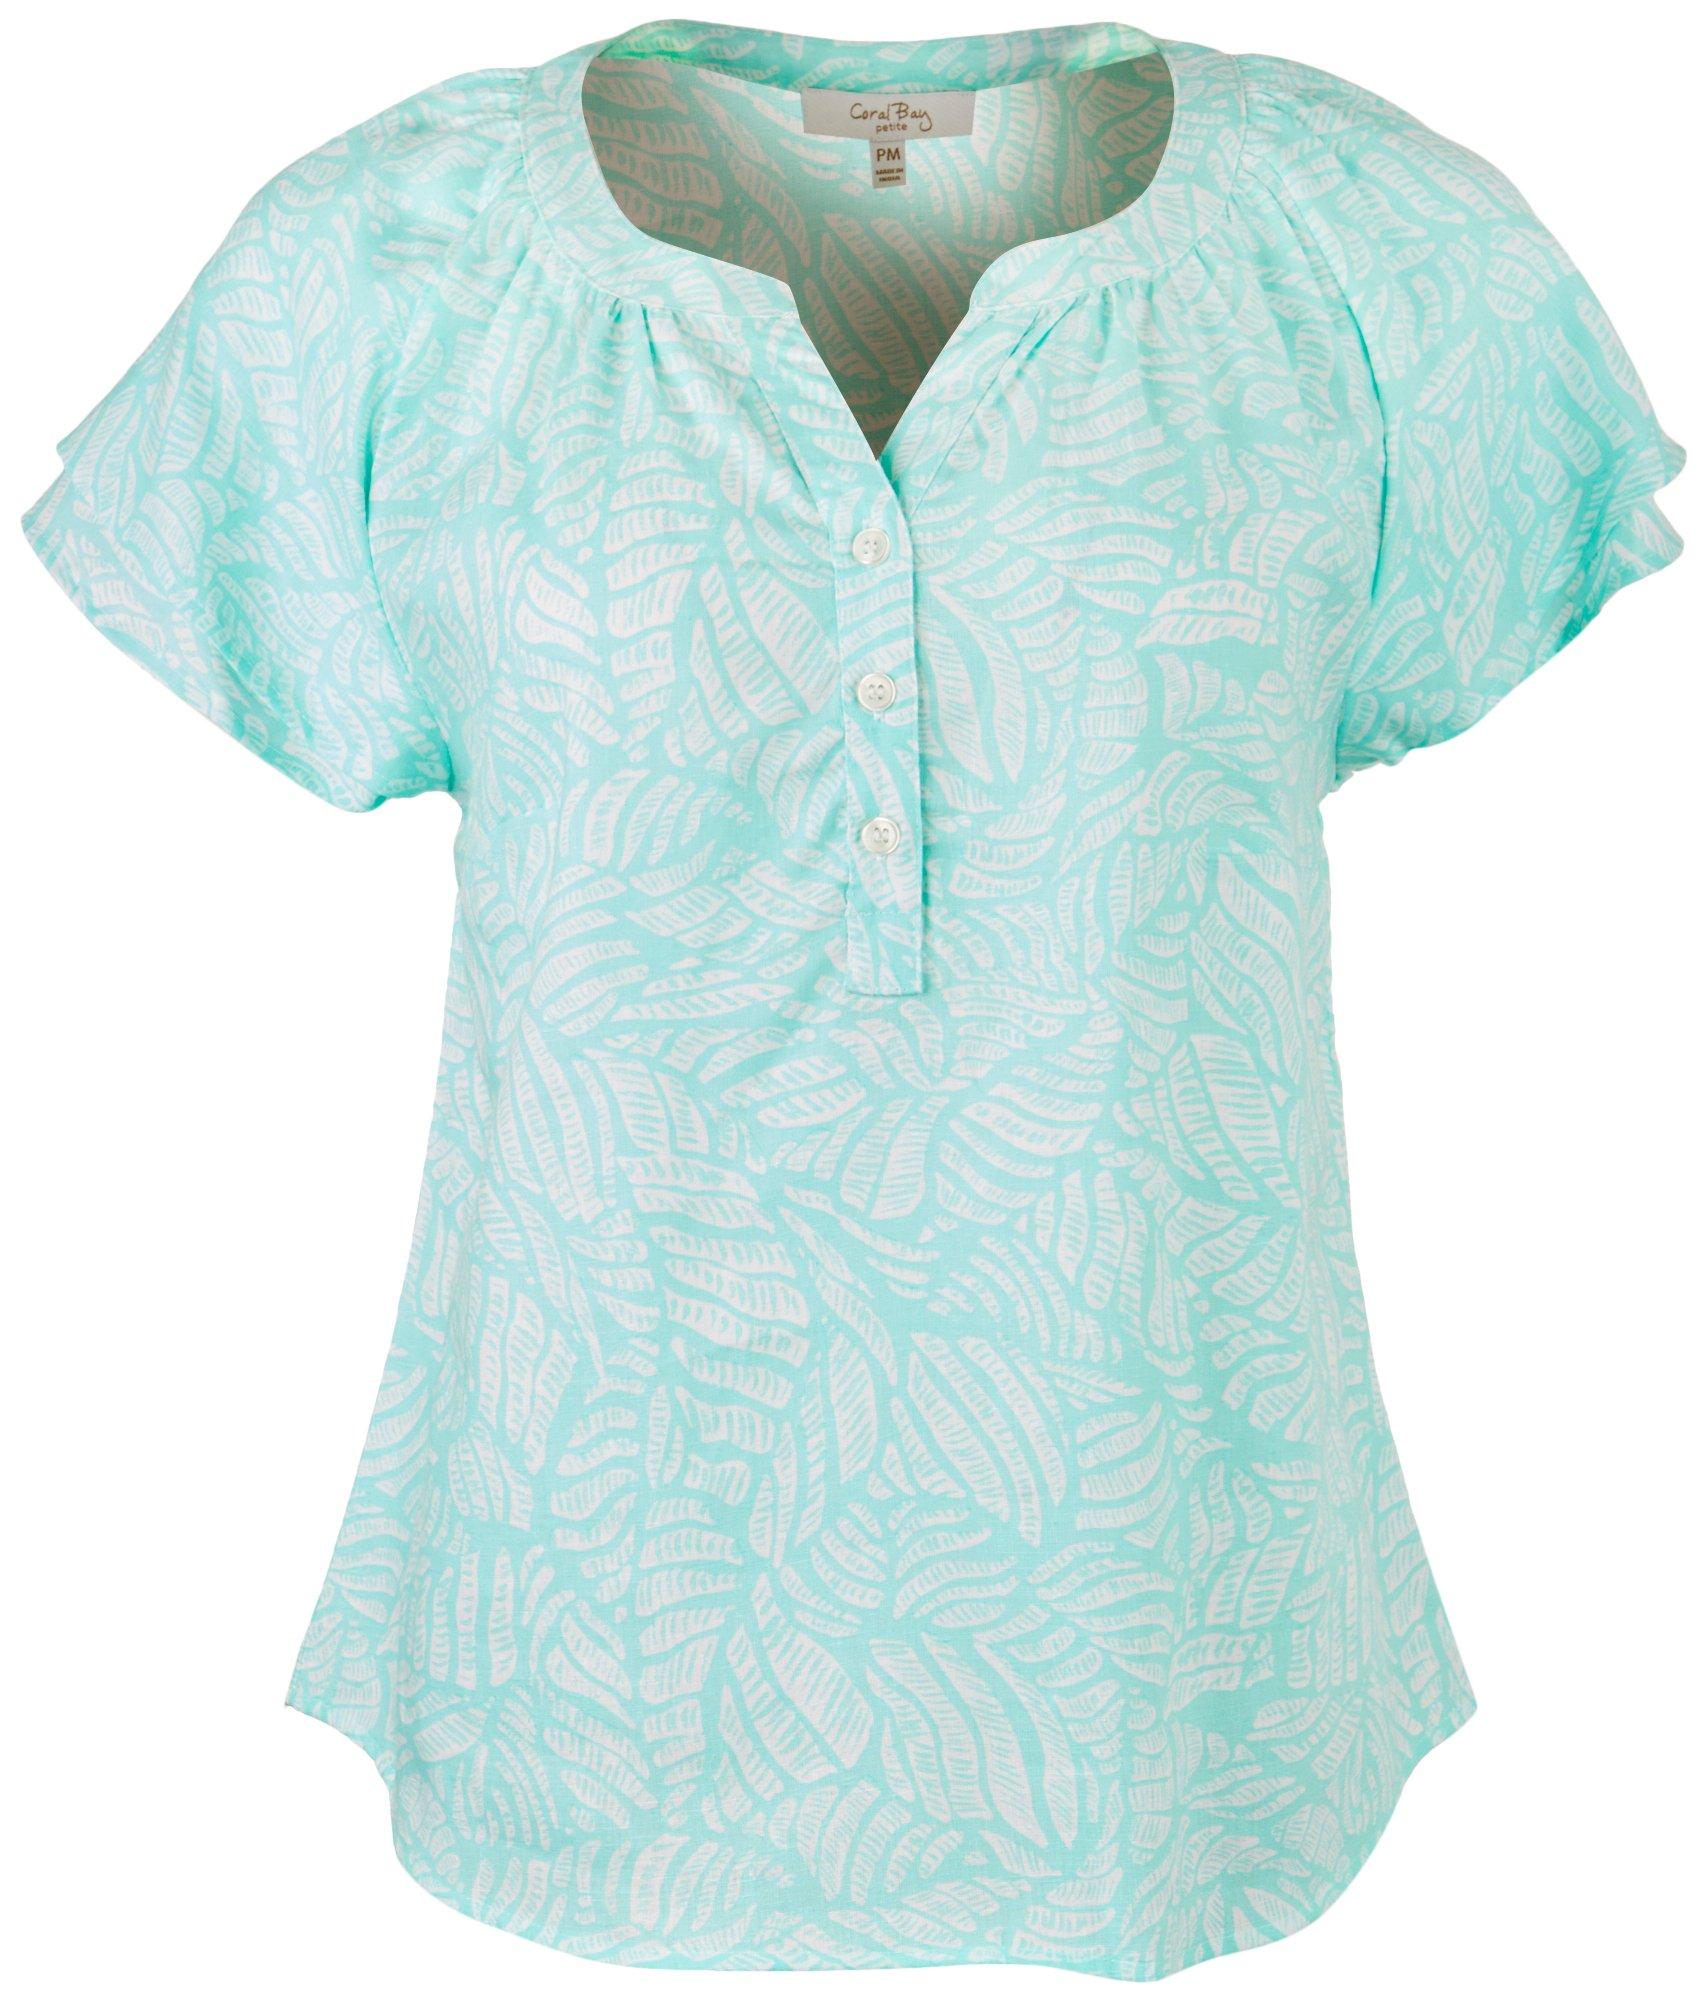 Coral Bay Petite Print Buttoned Short Sleeve Top